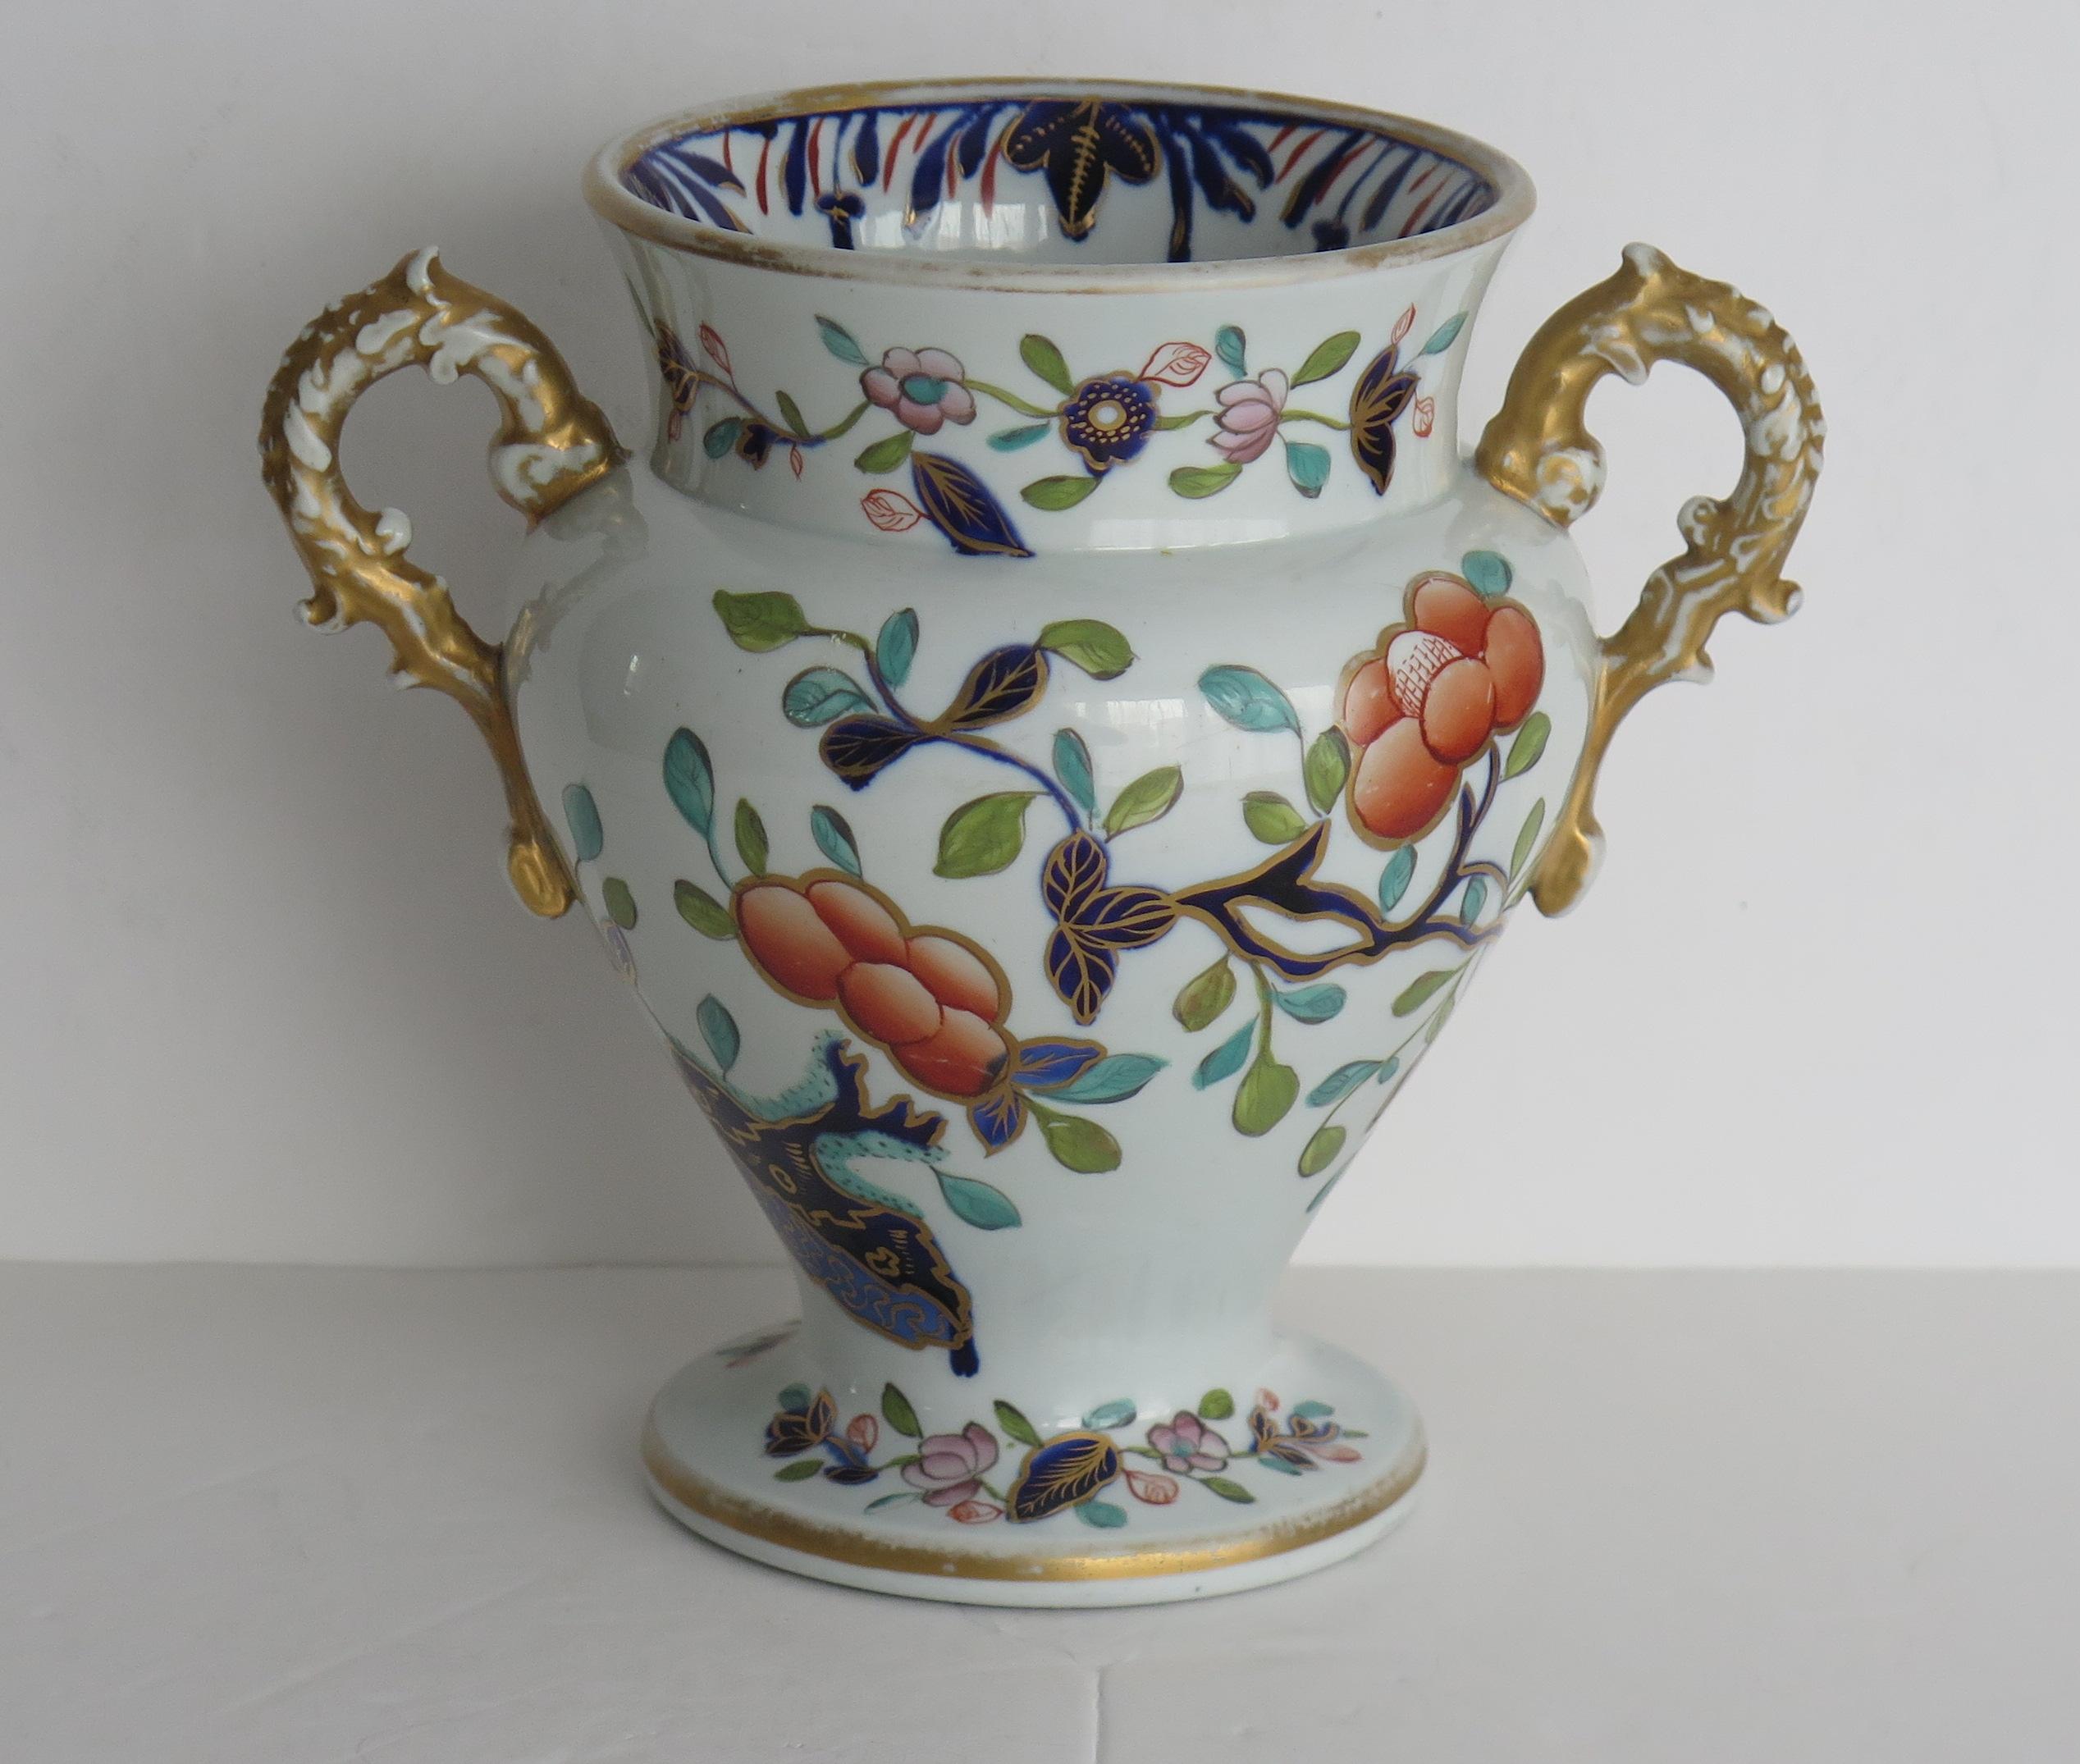 This is a rare, very early ironstone vase, in a typical hand painted Japan pattern, made by the Mason's factory in the early 19th century, Circa 1815.

The vase has a baluster shape raised on a circular foot with two moulded, spurred side handles